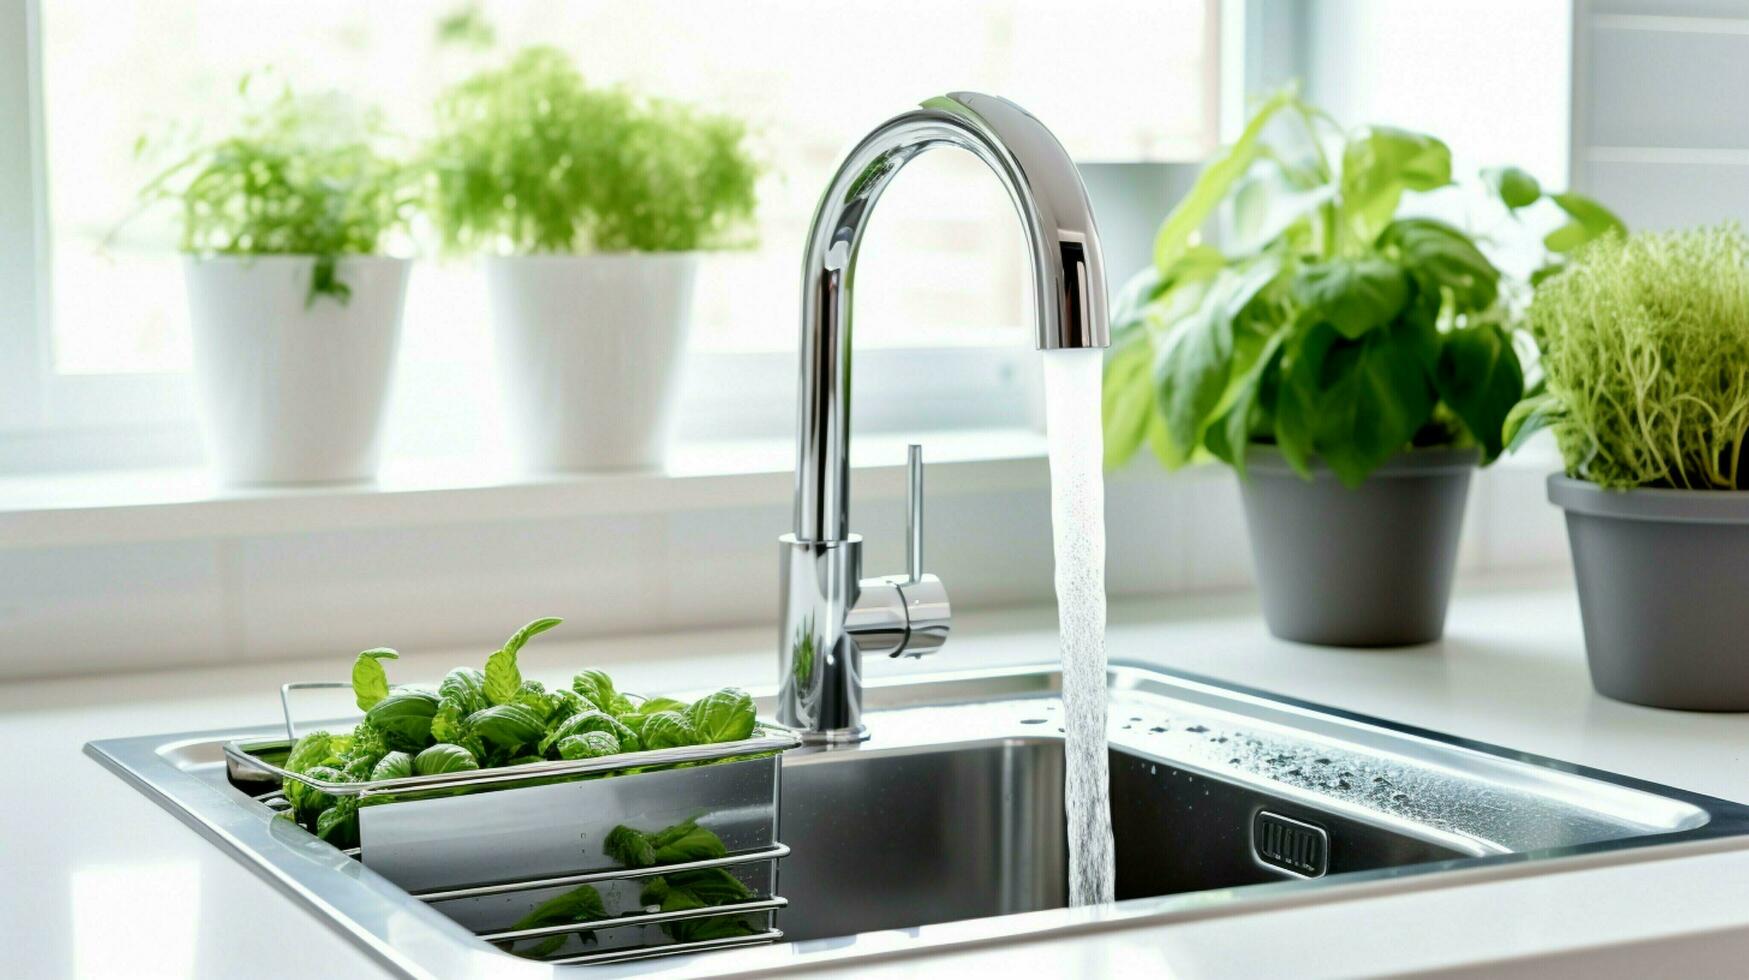 clean modern kitchen sink with faucet and liquid container photo